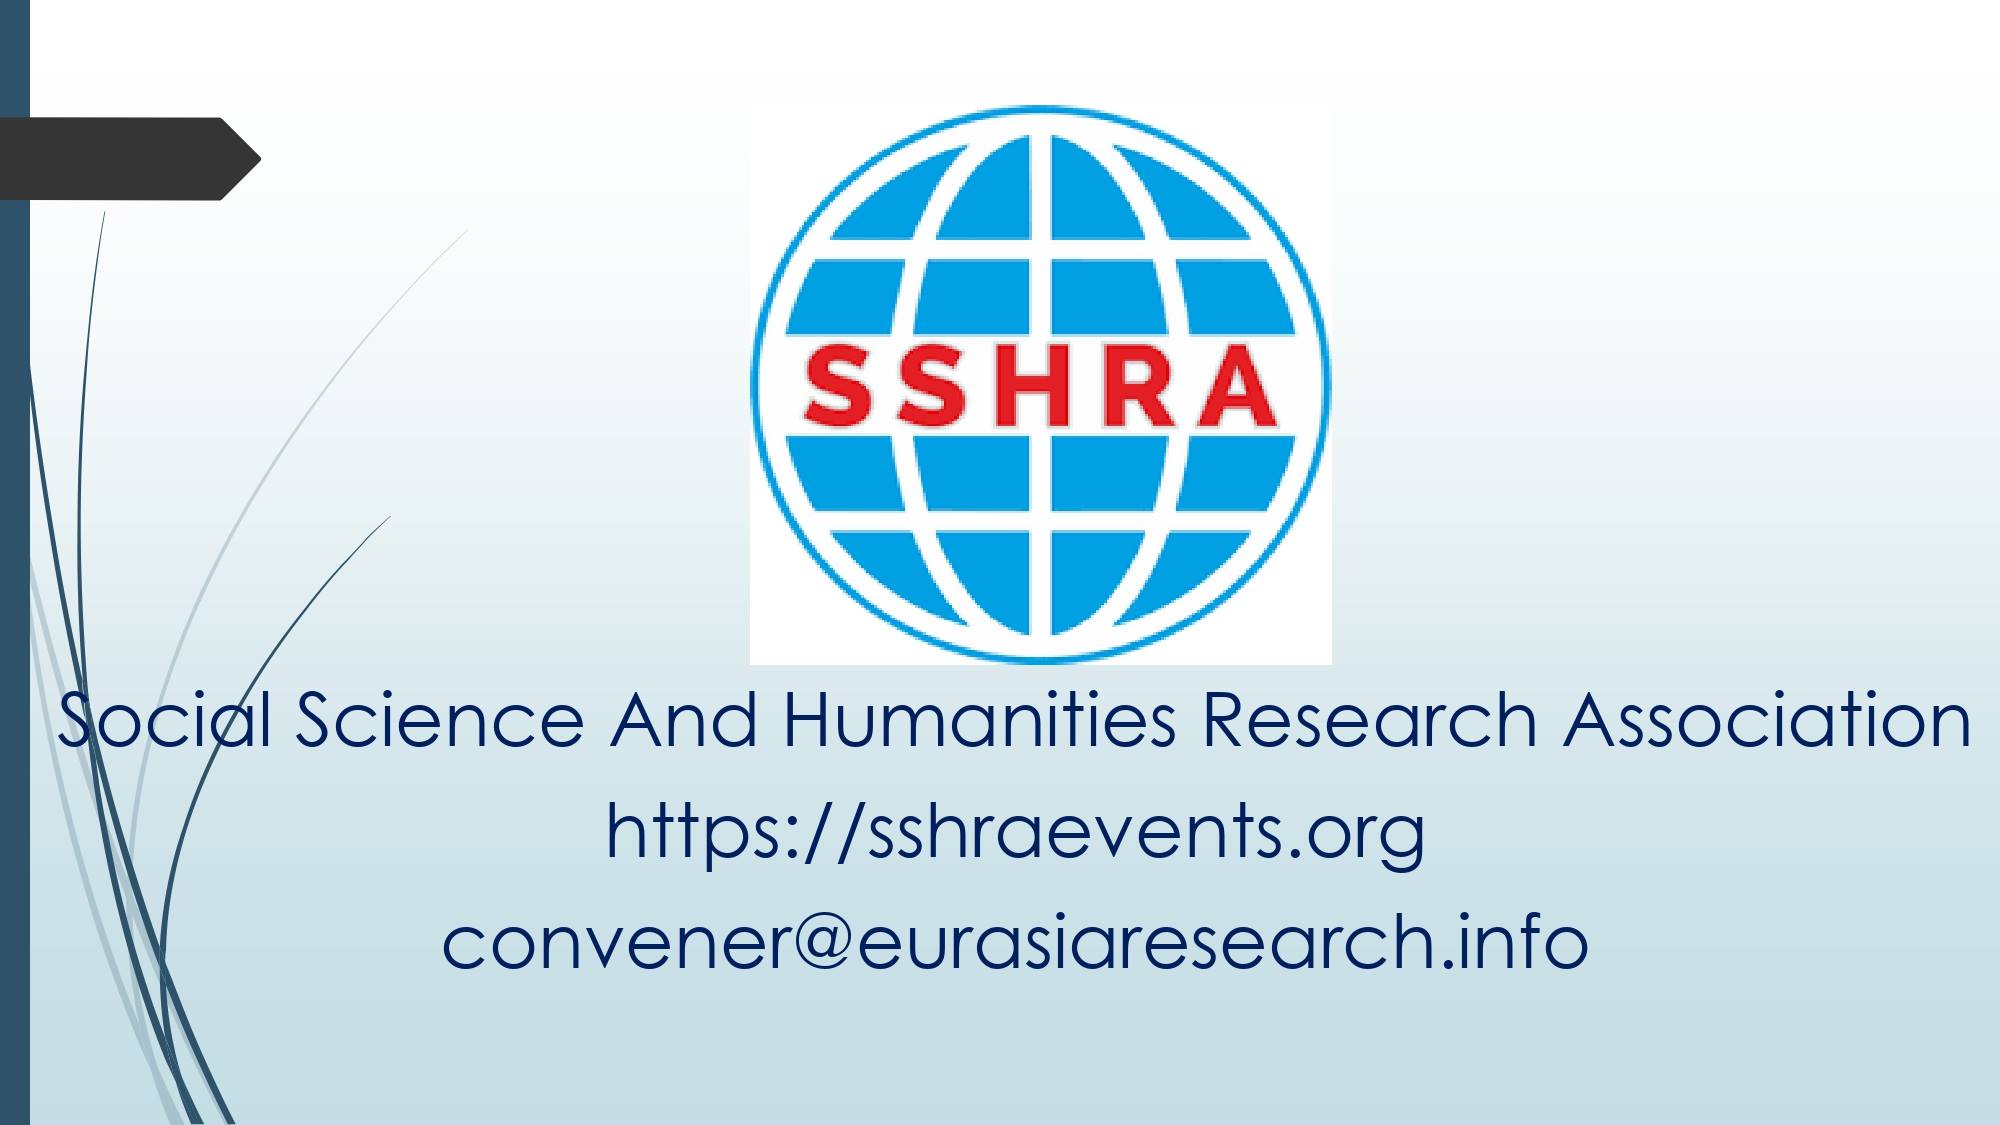 SSHRA 2023 – Social Science & Humanities Research Association International Conference, 22-23 September, Athens, Online Event